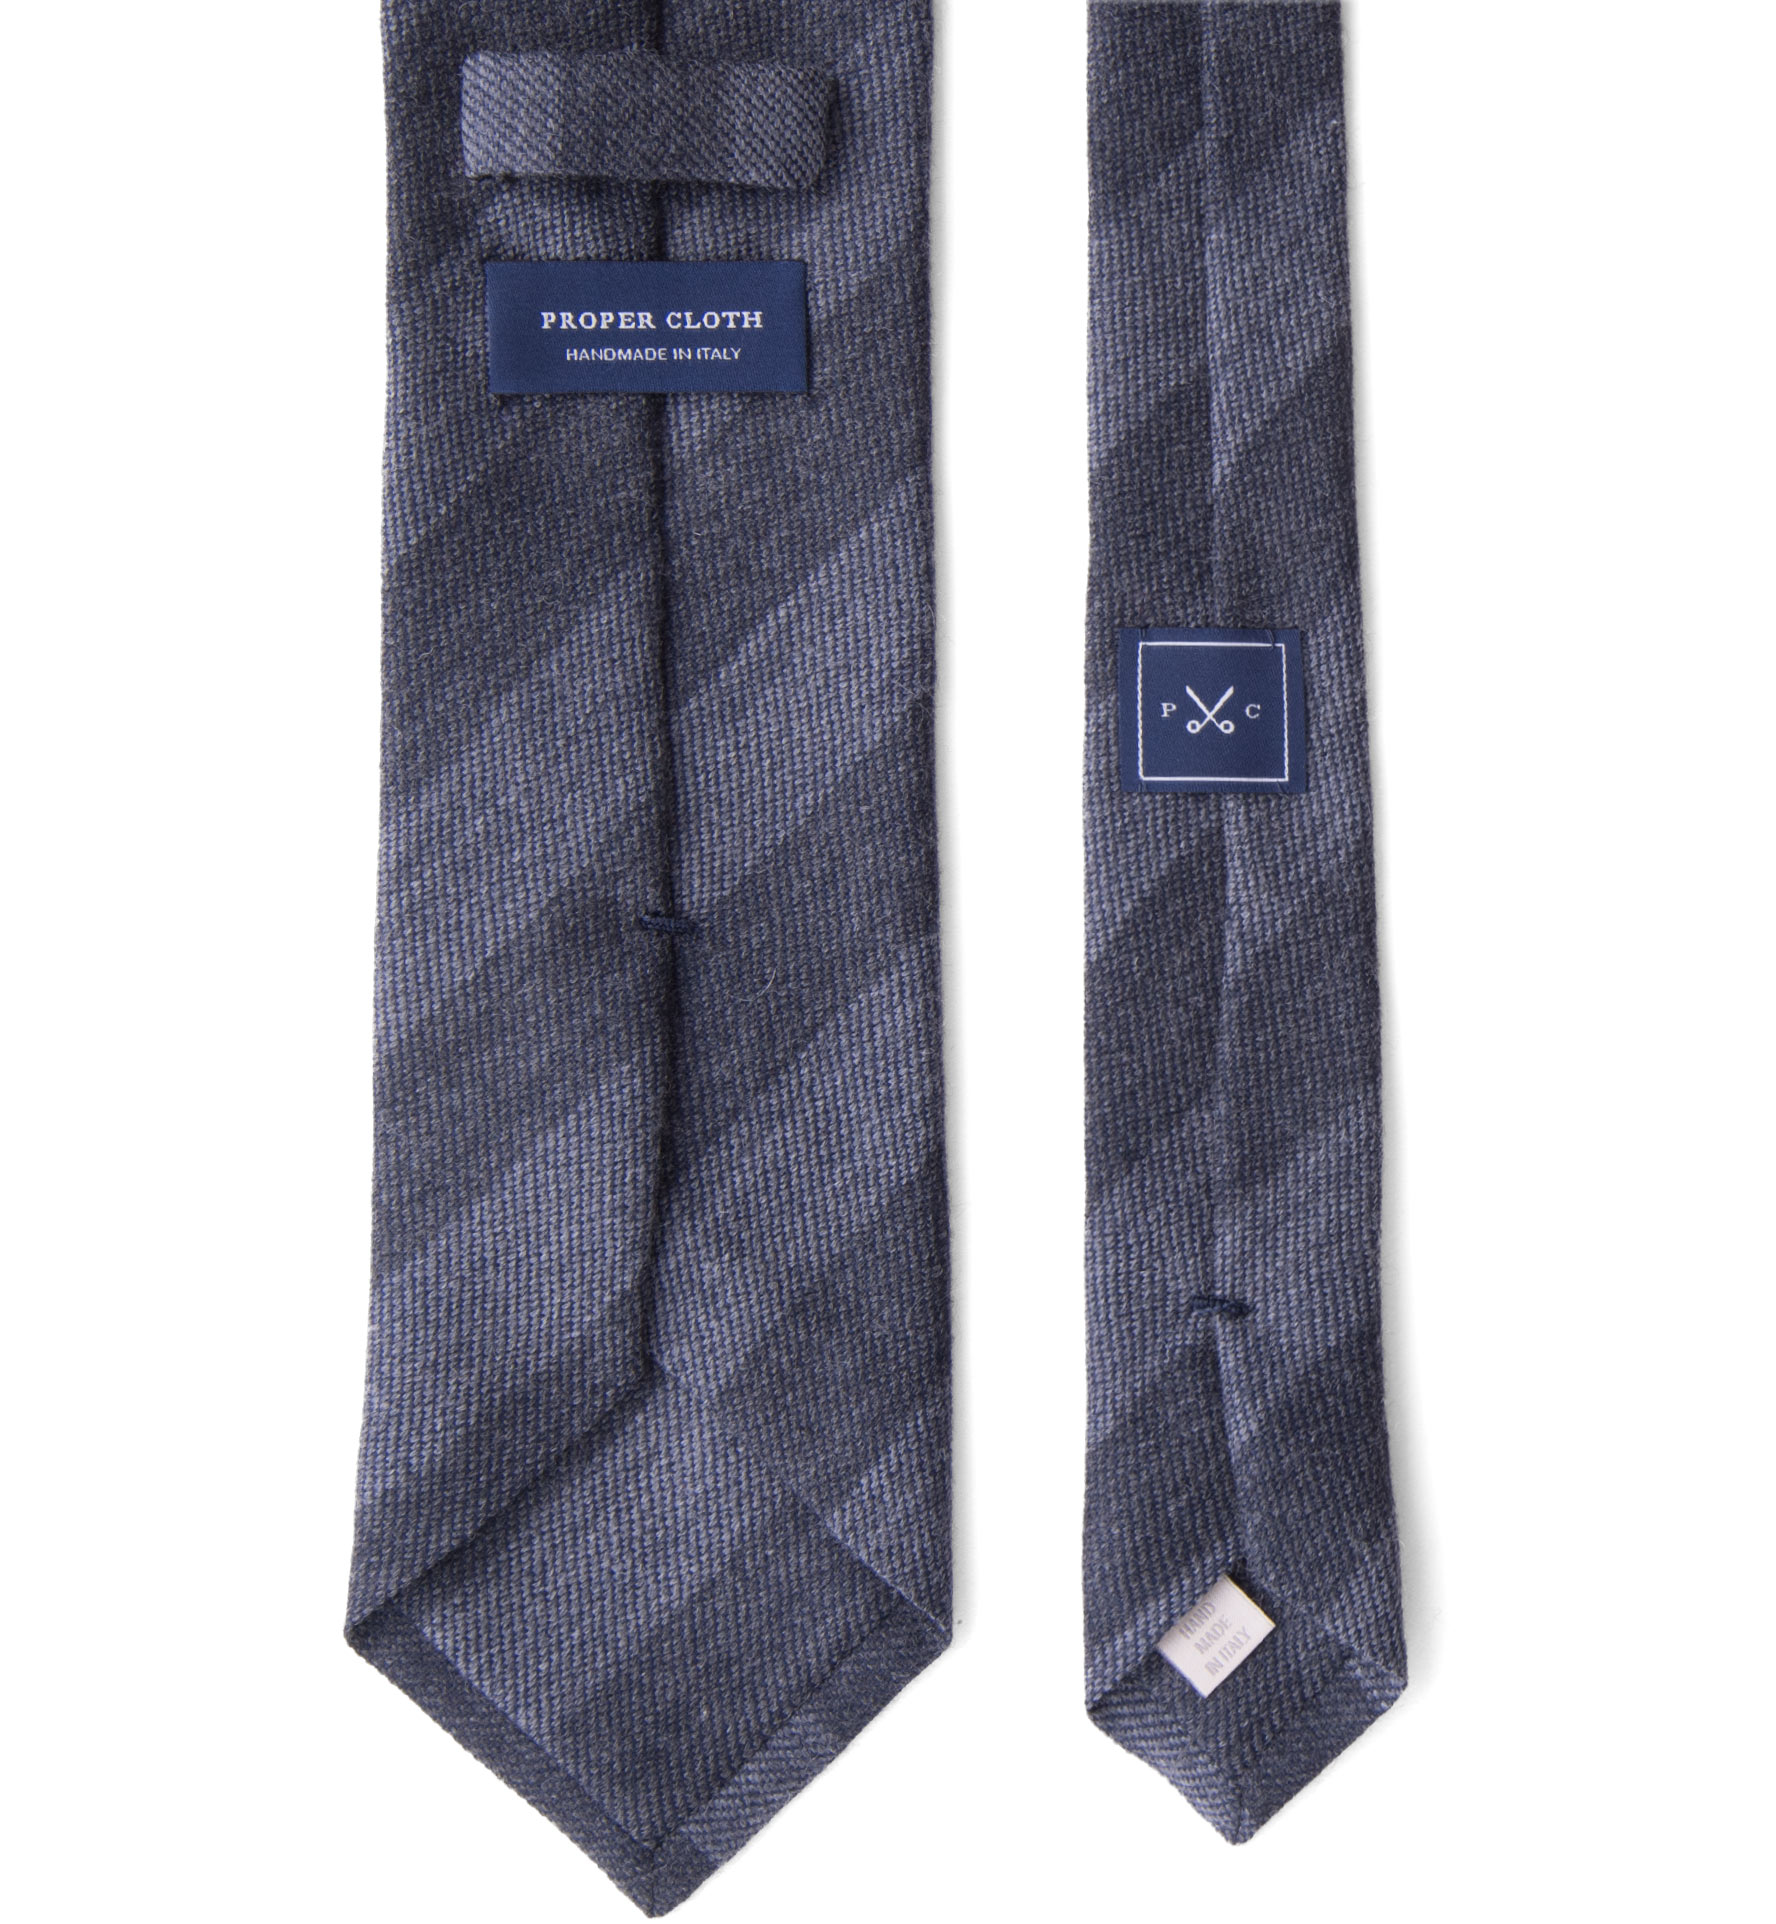 Charcoal and Grey Wool Striped Tie by Proper Cloth